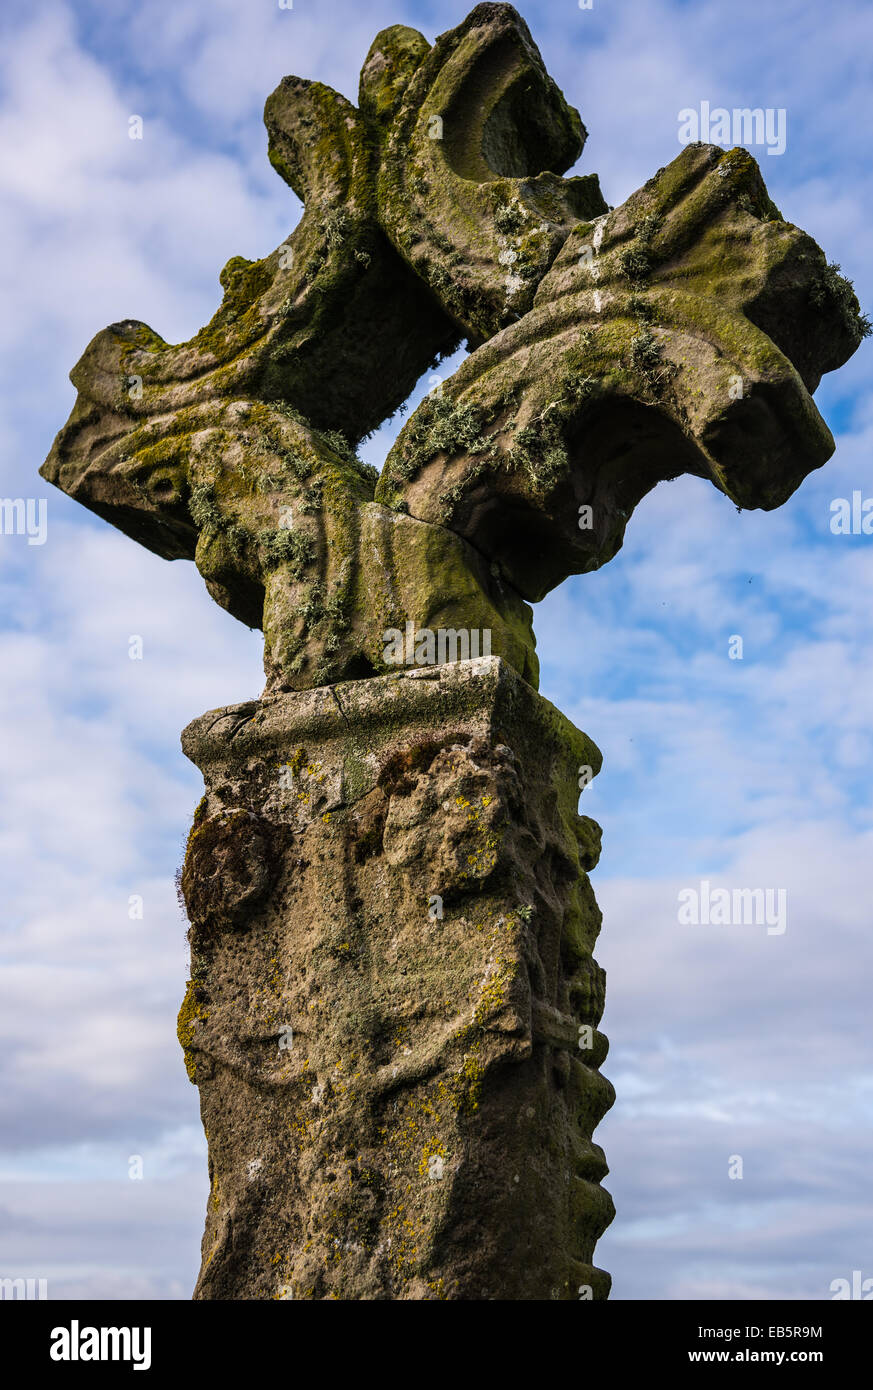 Stone Cross, St Mary's Augustinian Priory, Devenish Island, County Fermanagh, Northern Ireland. Stock Photo